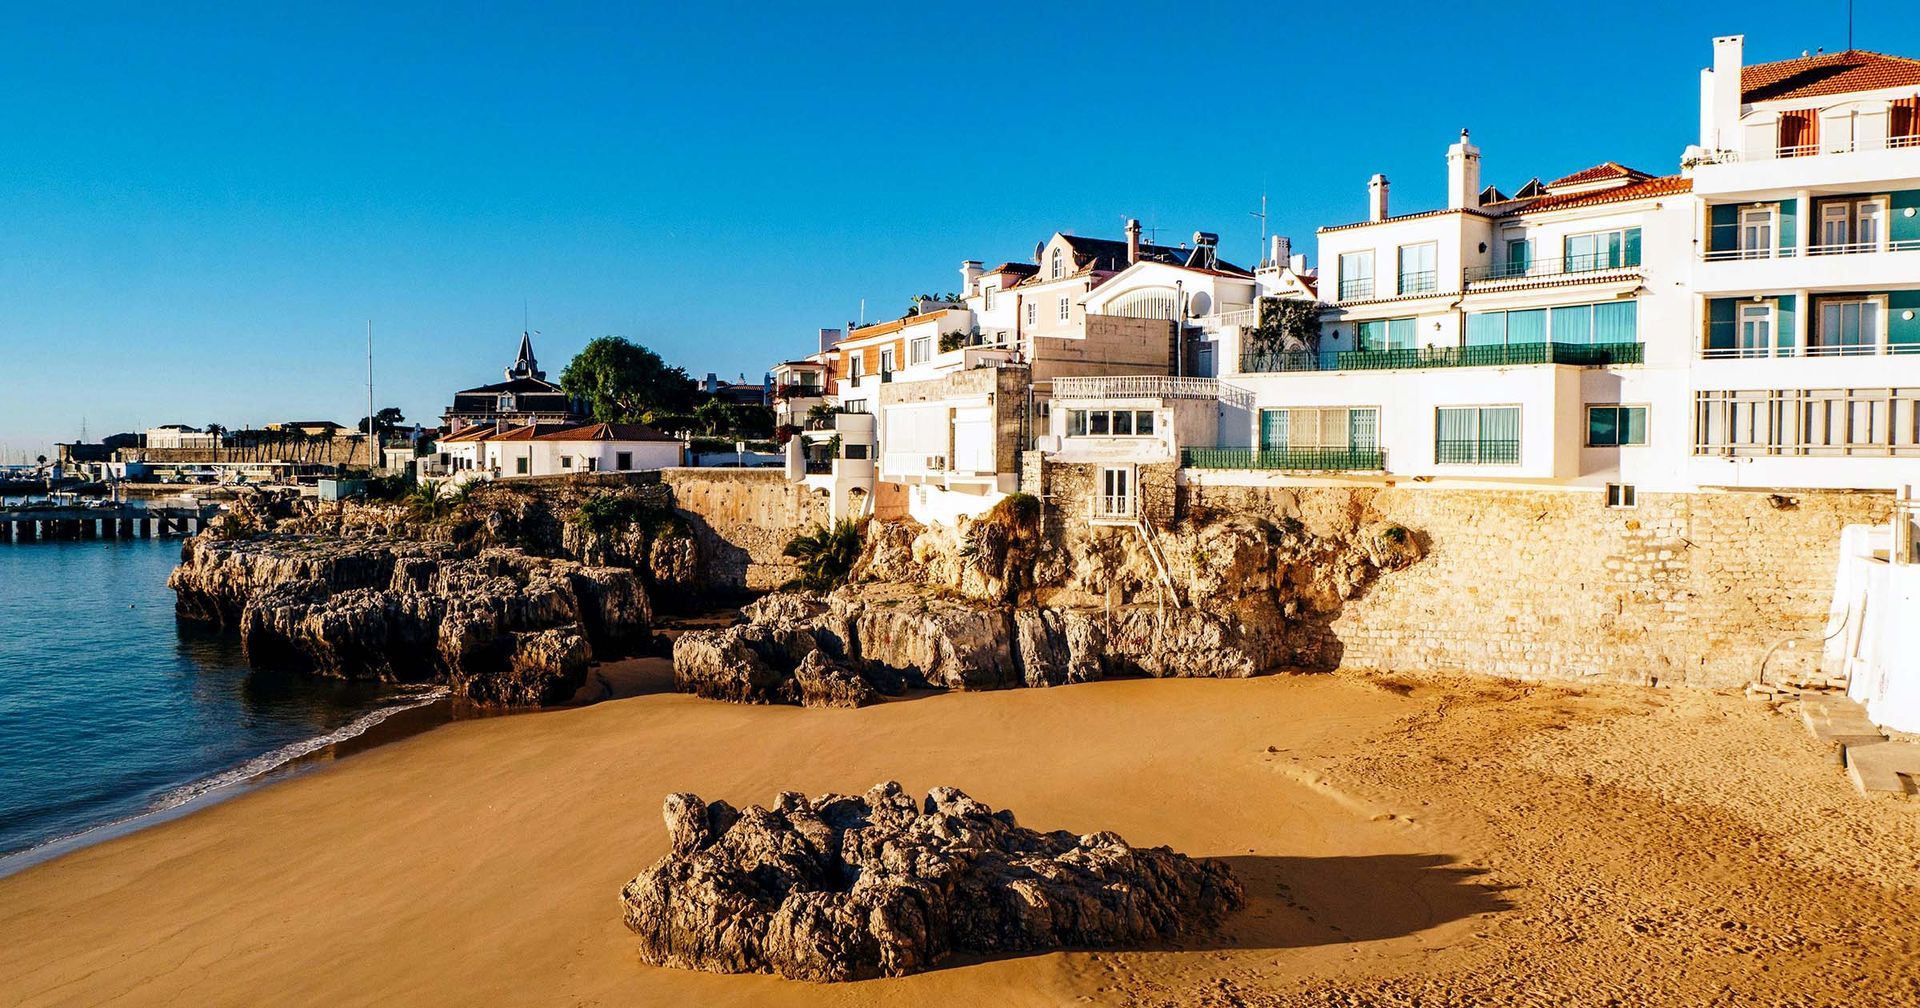 This recognition underscores Cascais' ongoing dedication to environmental responsibility.